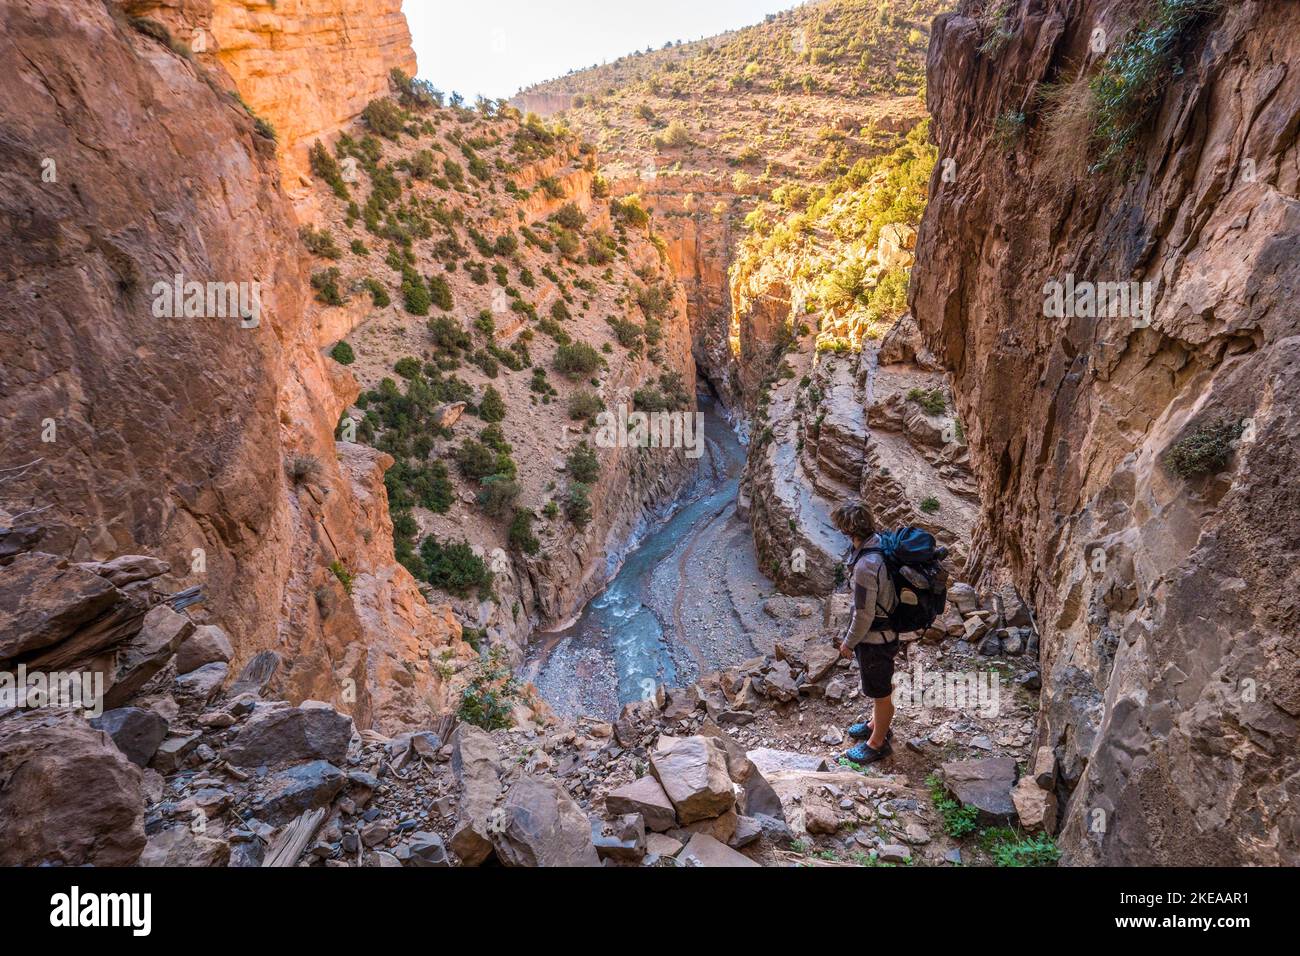 A trekker on a man made stairway up the canyon side of the M'Goun Gorge in the Atlas mountains of Morocco Stock Photo